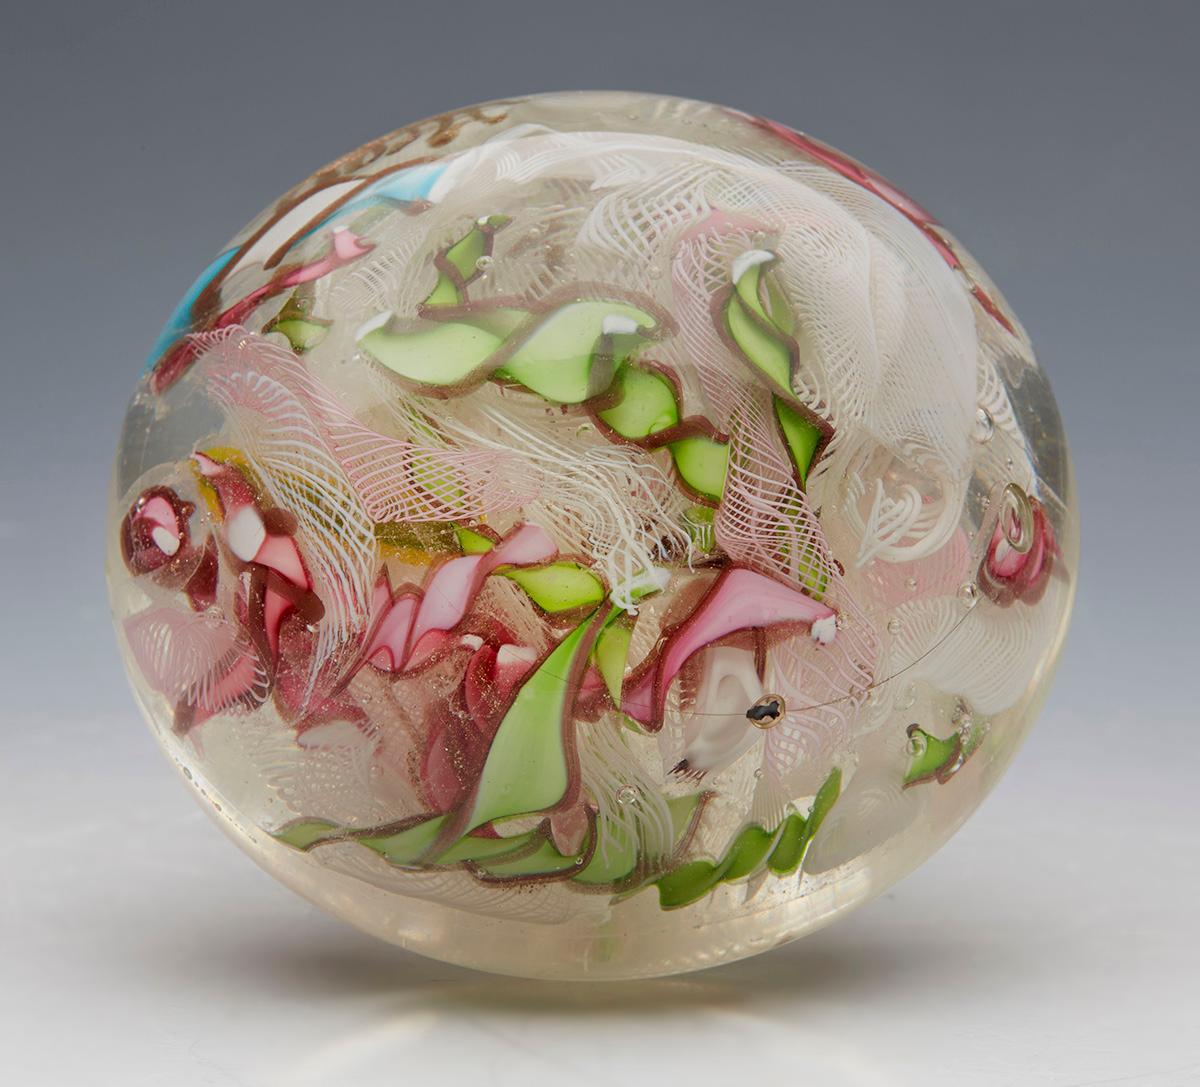 A large and impressive vintage Italian Murano glass paperweight made by Arte Vetreria Muranese (A.V.e.M.) and dating from around 1935. The large hand blown domed clear glass paperweight contains scattered coloured twisted ribbons and muslin canes